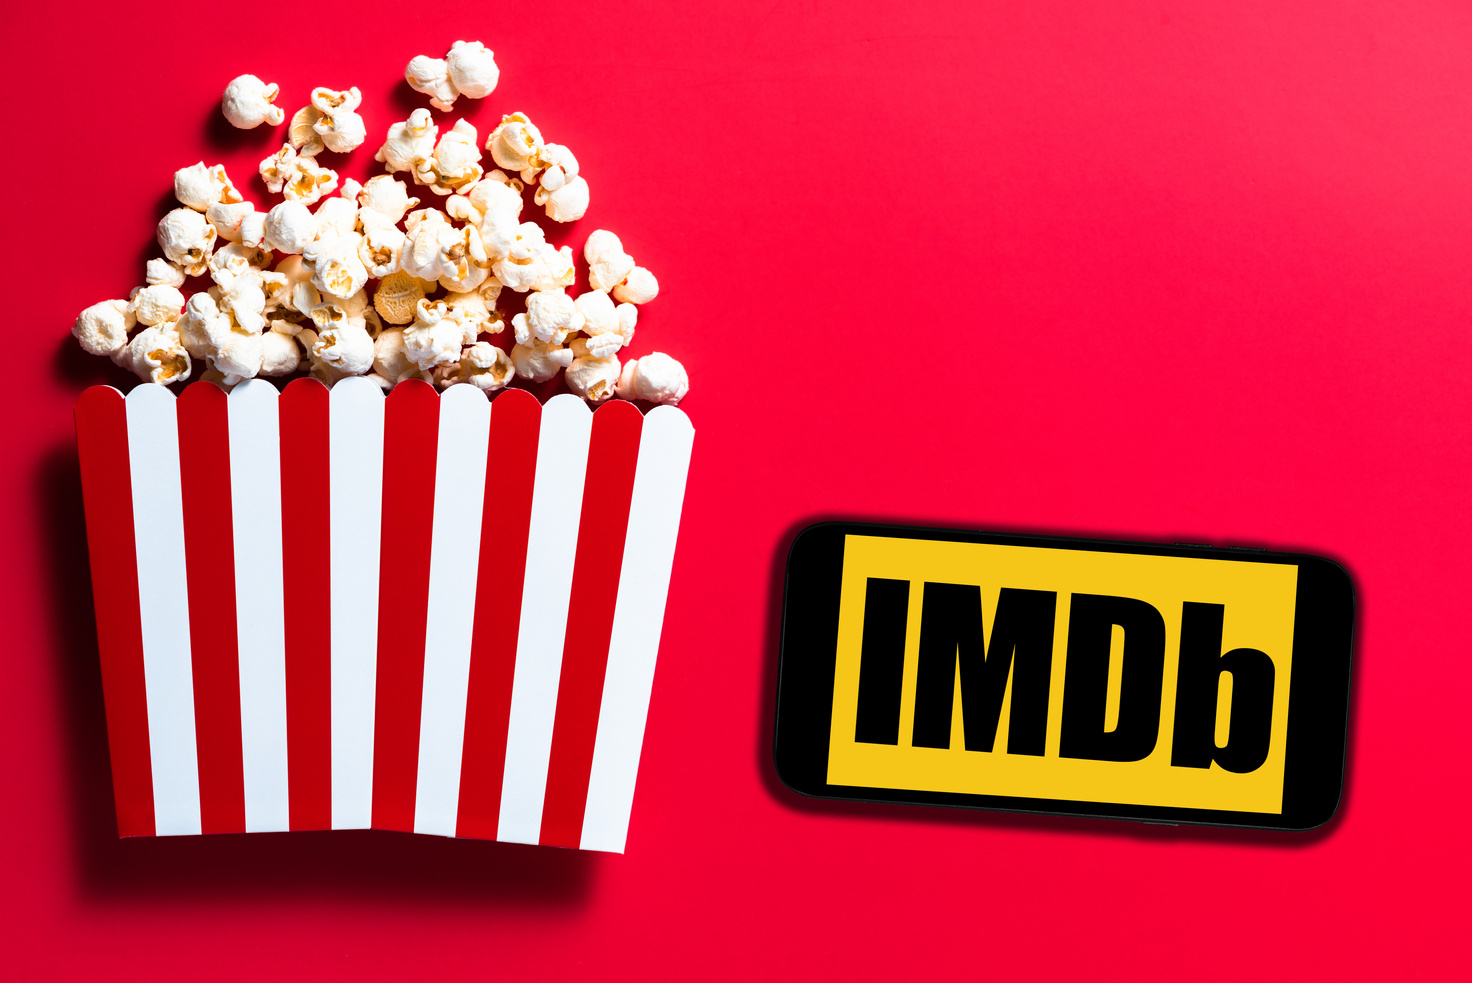 IMDb Logo and a Popcorn Bucket on a Red Background